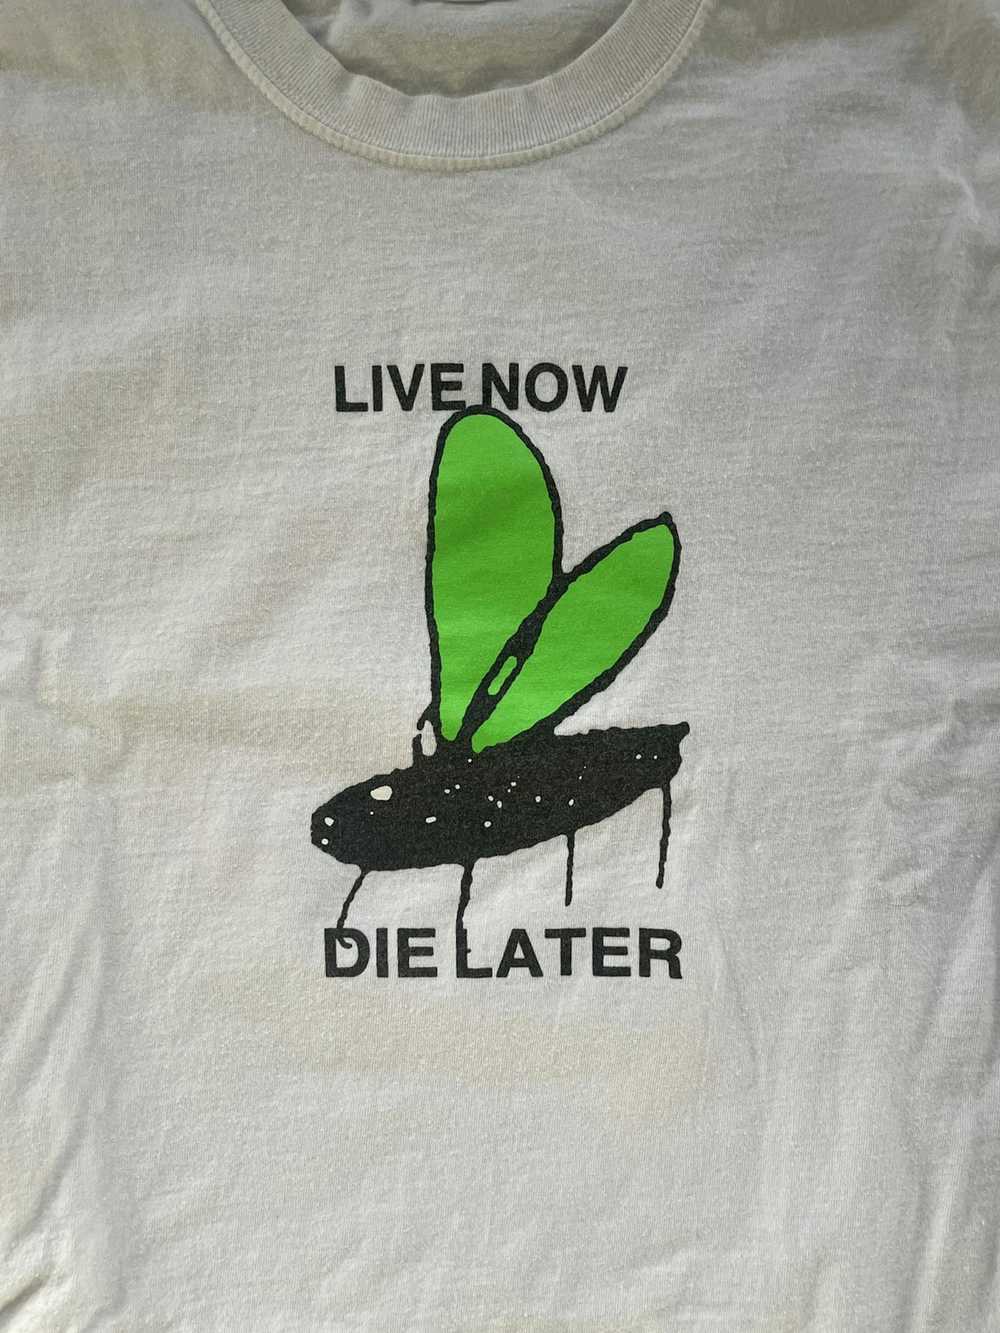 Noah Noah “Live Now Die Later” Fly T shirt - image 2